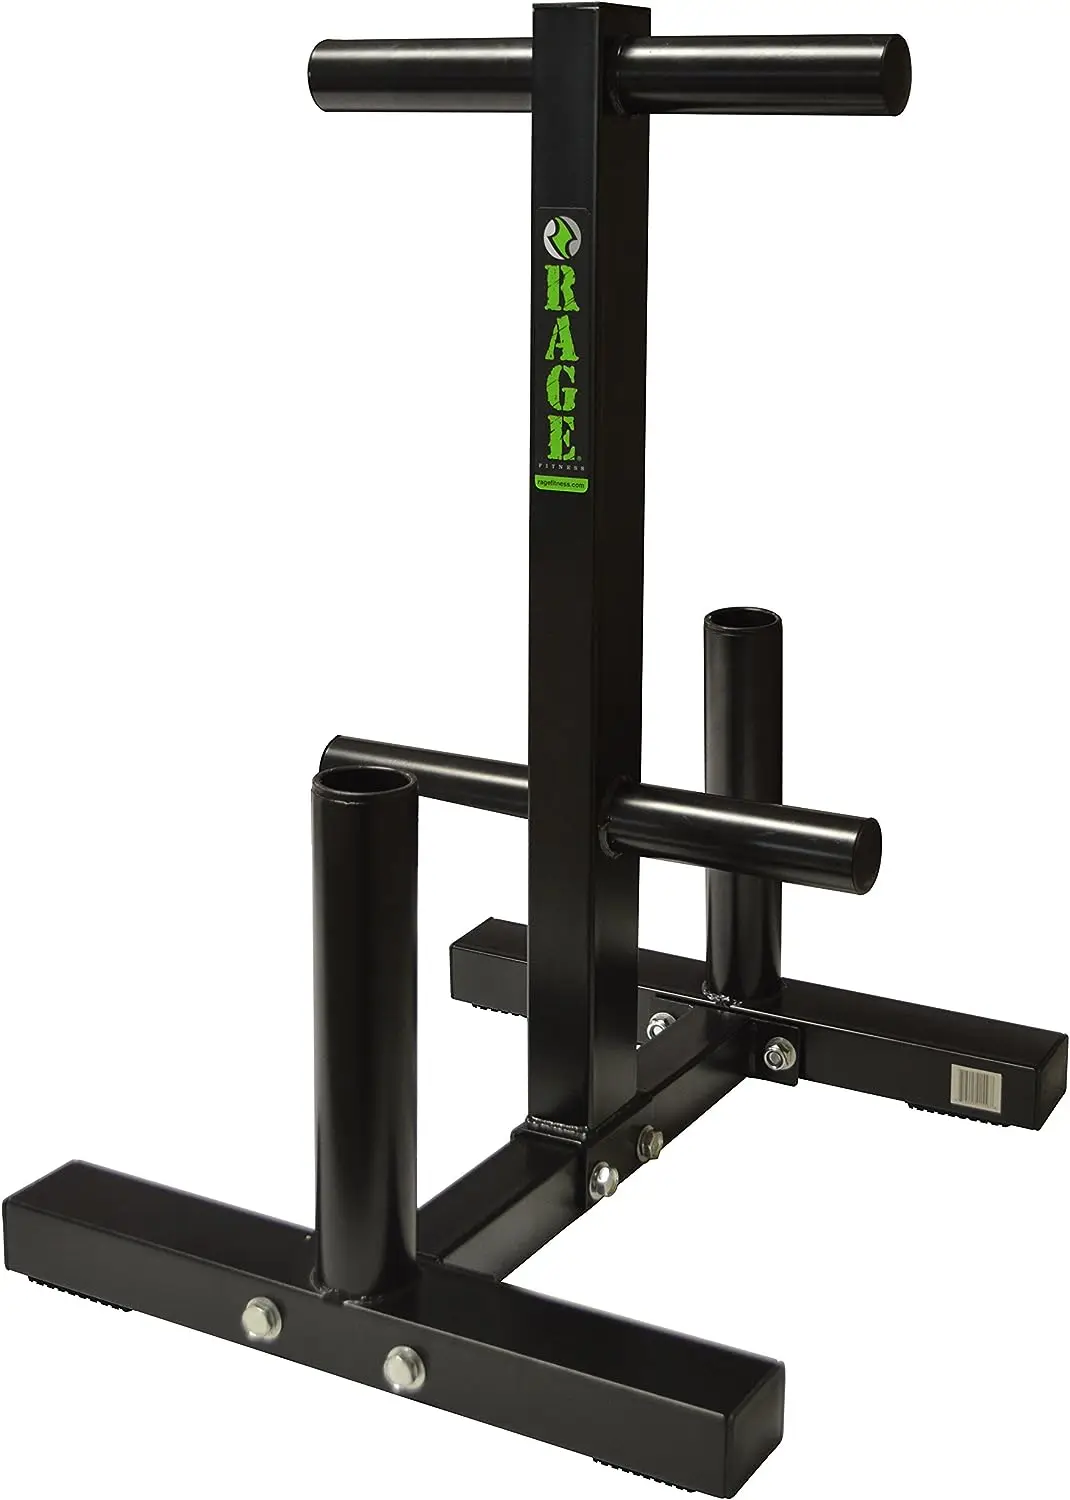 

for plates & Barbell stand | This weight tree has 6" x 2" of 4 spindles & can hold over 360lbs of weight with